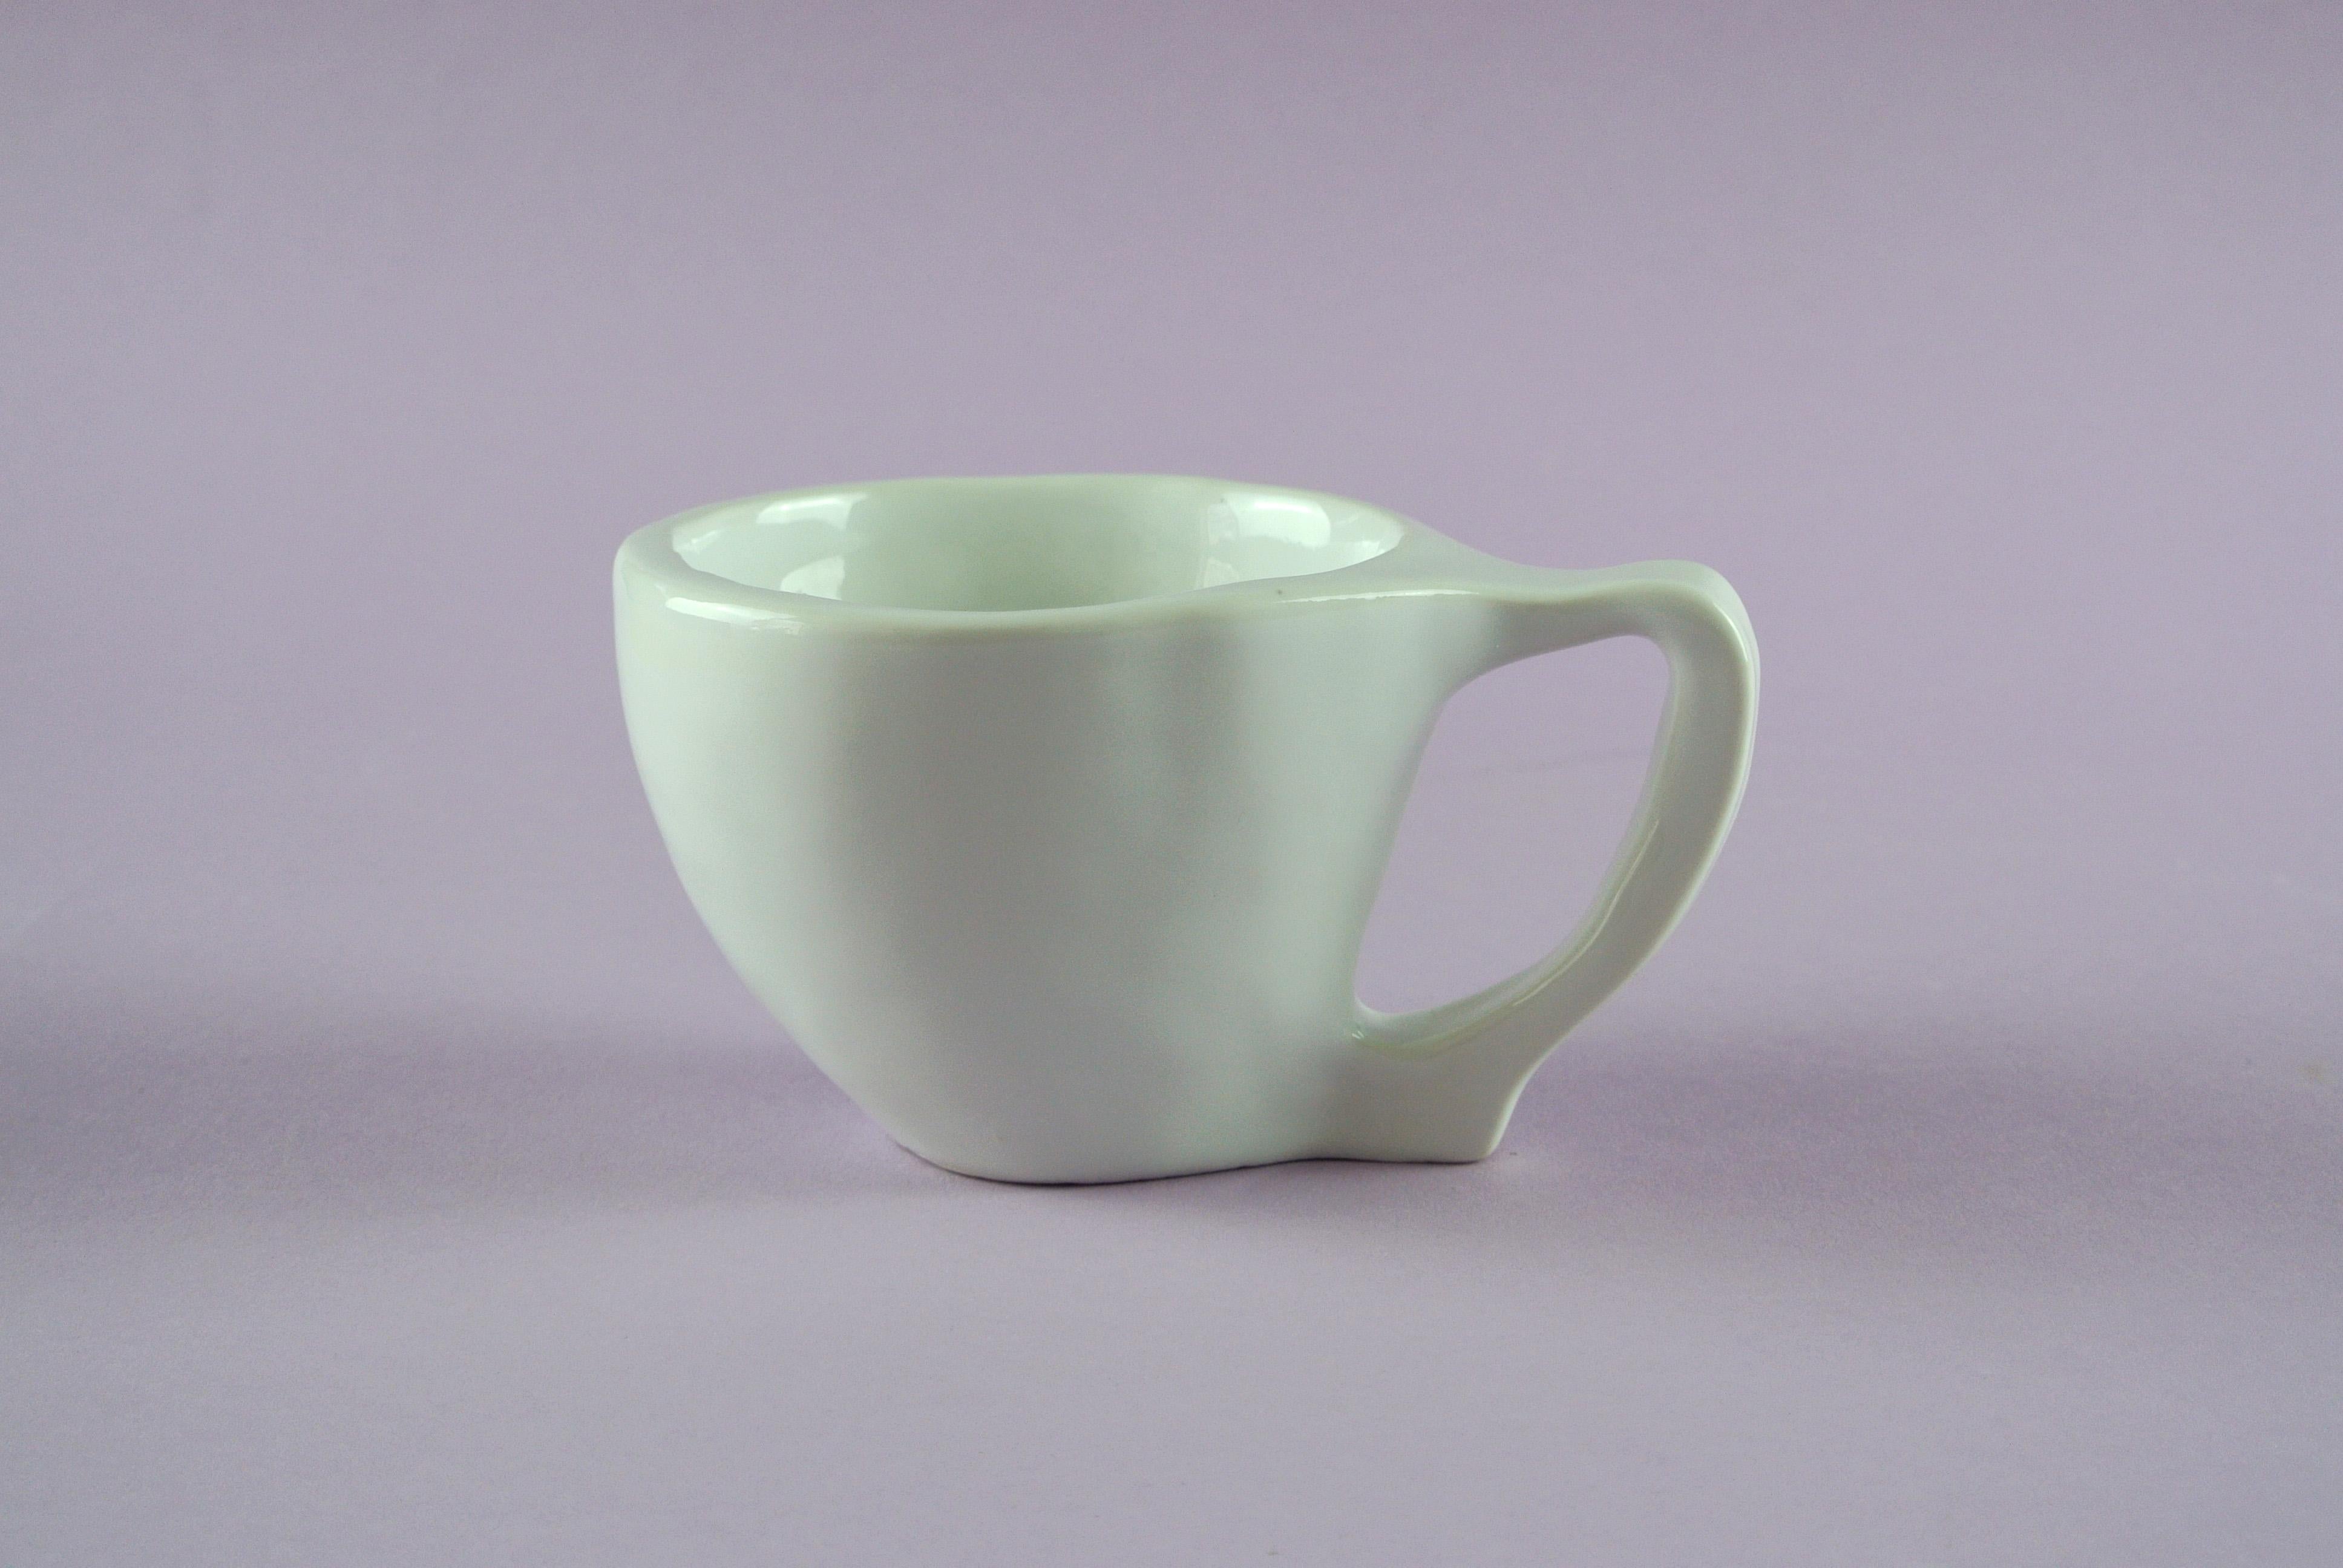 Organic Modern Hand Carved Porcelain Cup and Tray with White Glossy Glaze